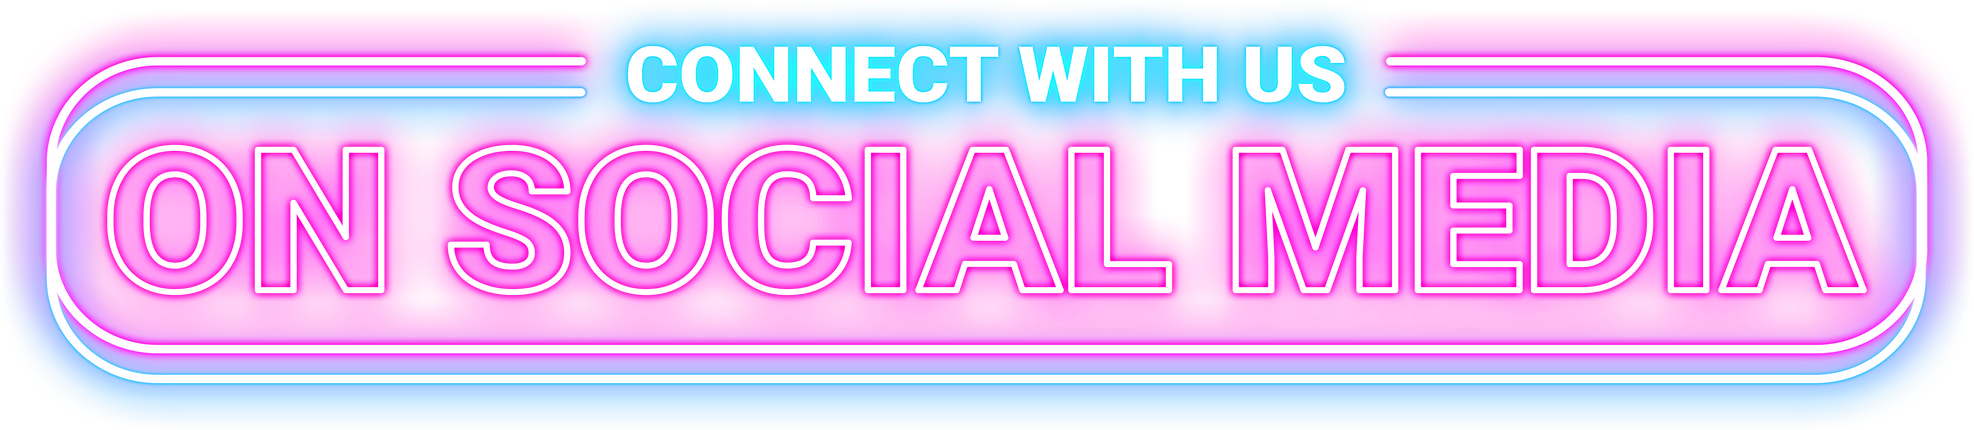 Connect With Us On Social Media Neon